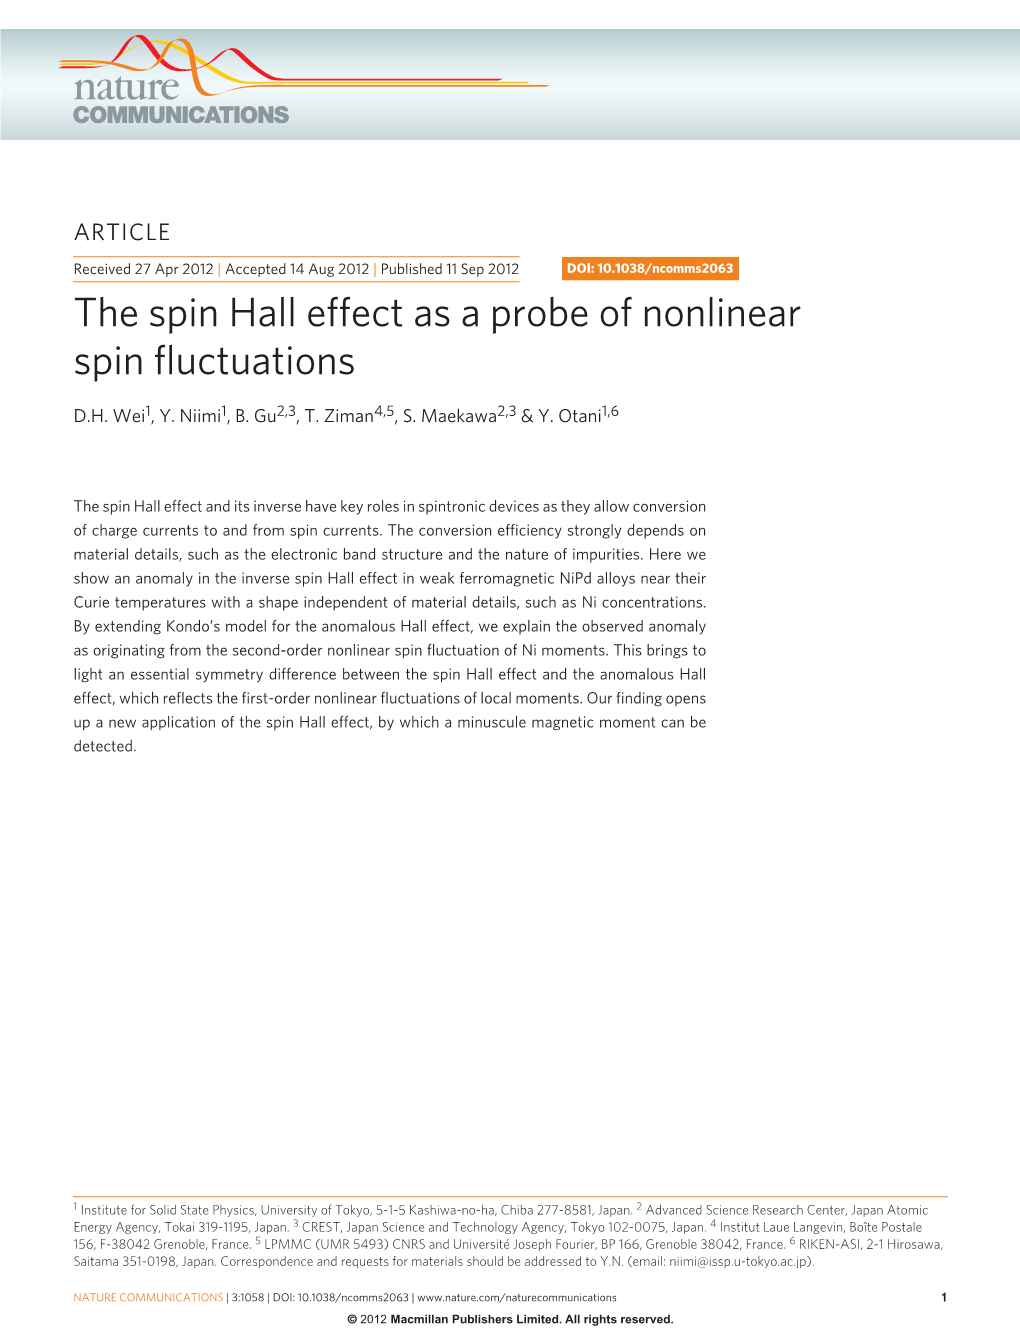 The Spin Hall Effect As a Probe of Nonlinear Spin Fluctuations